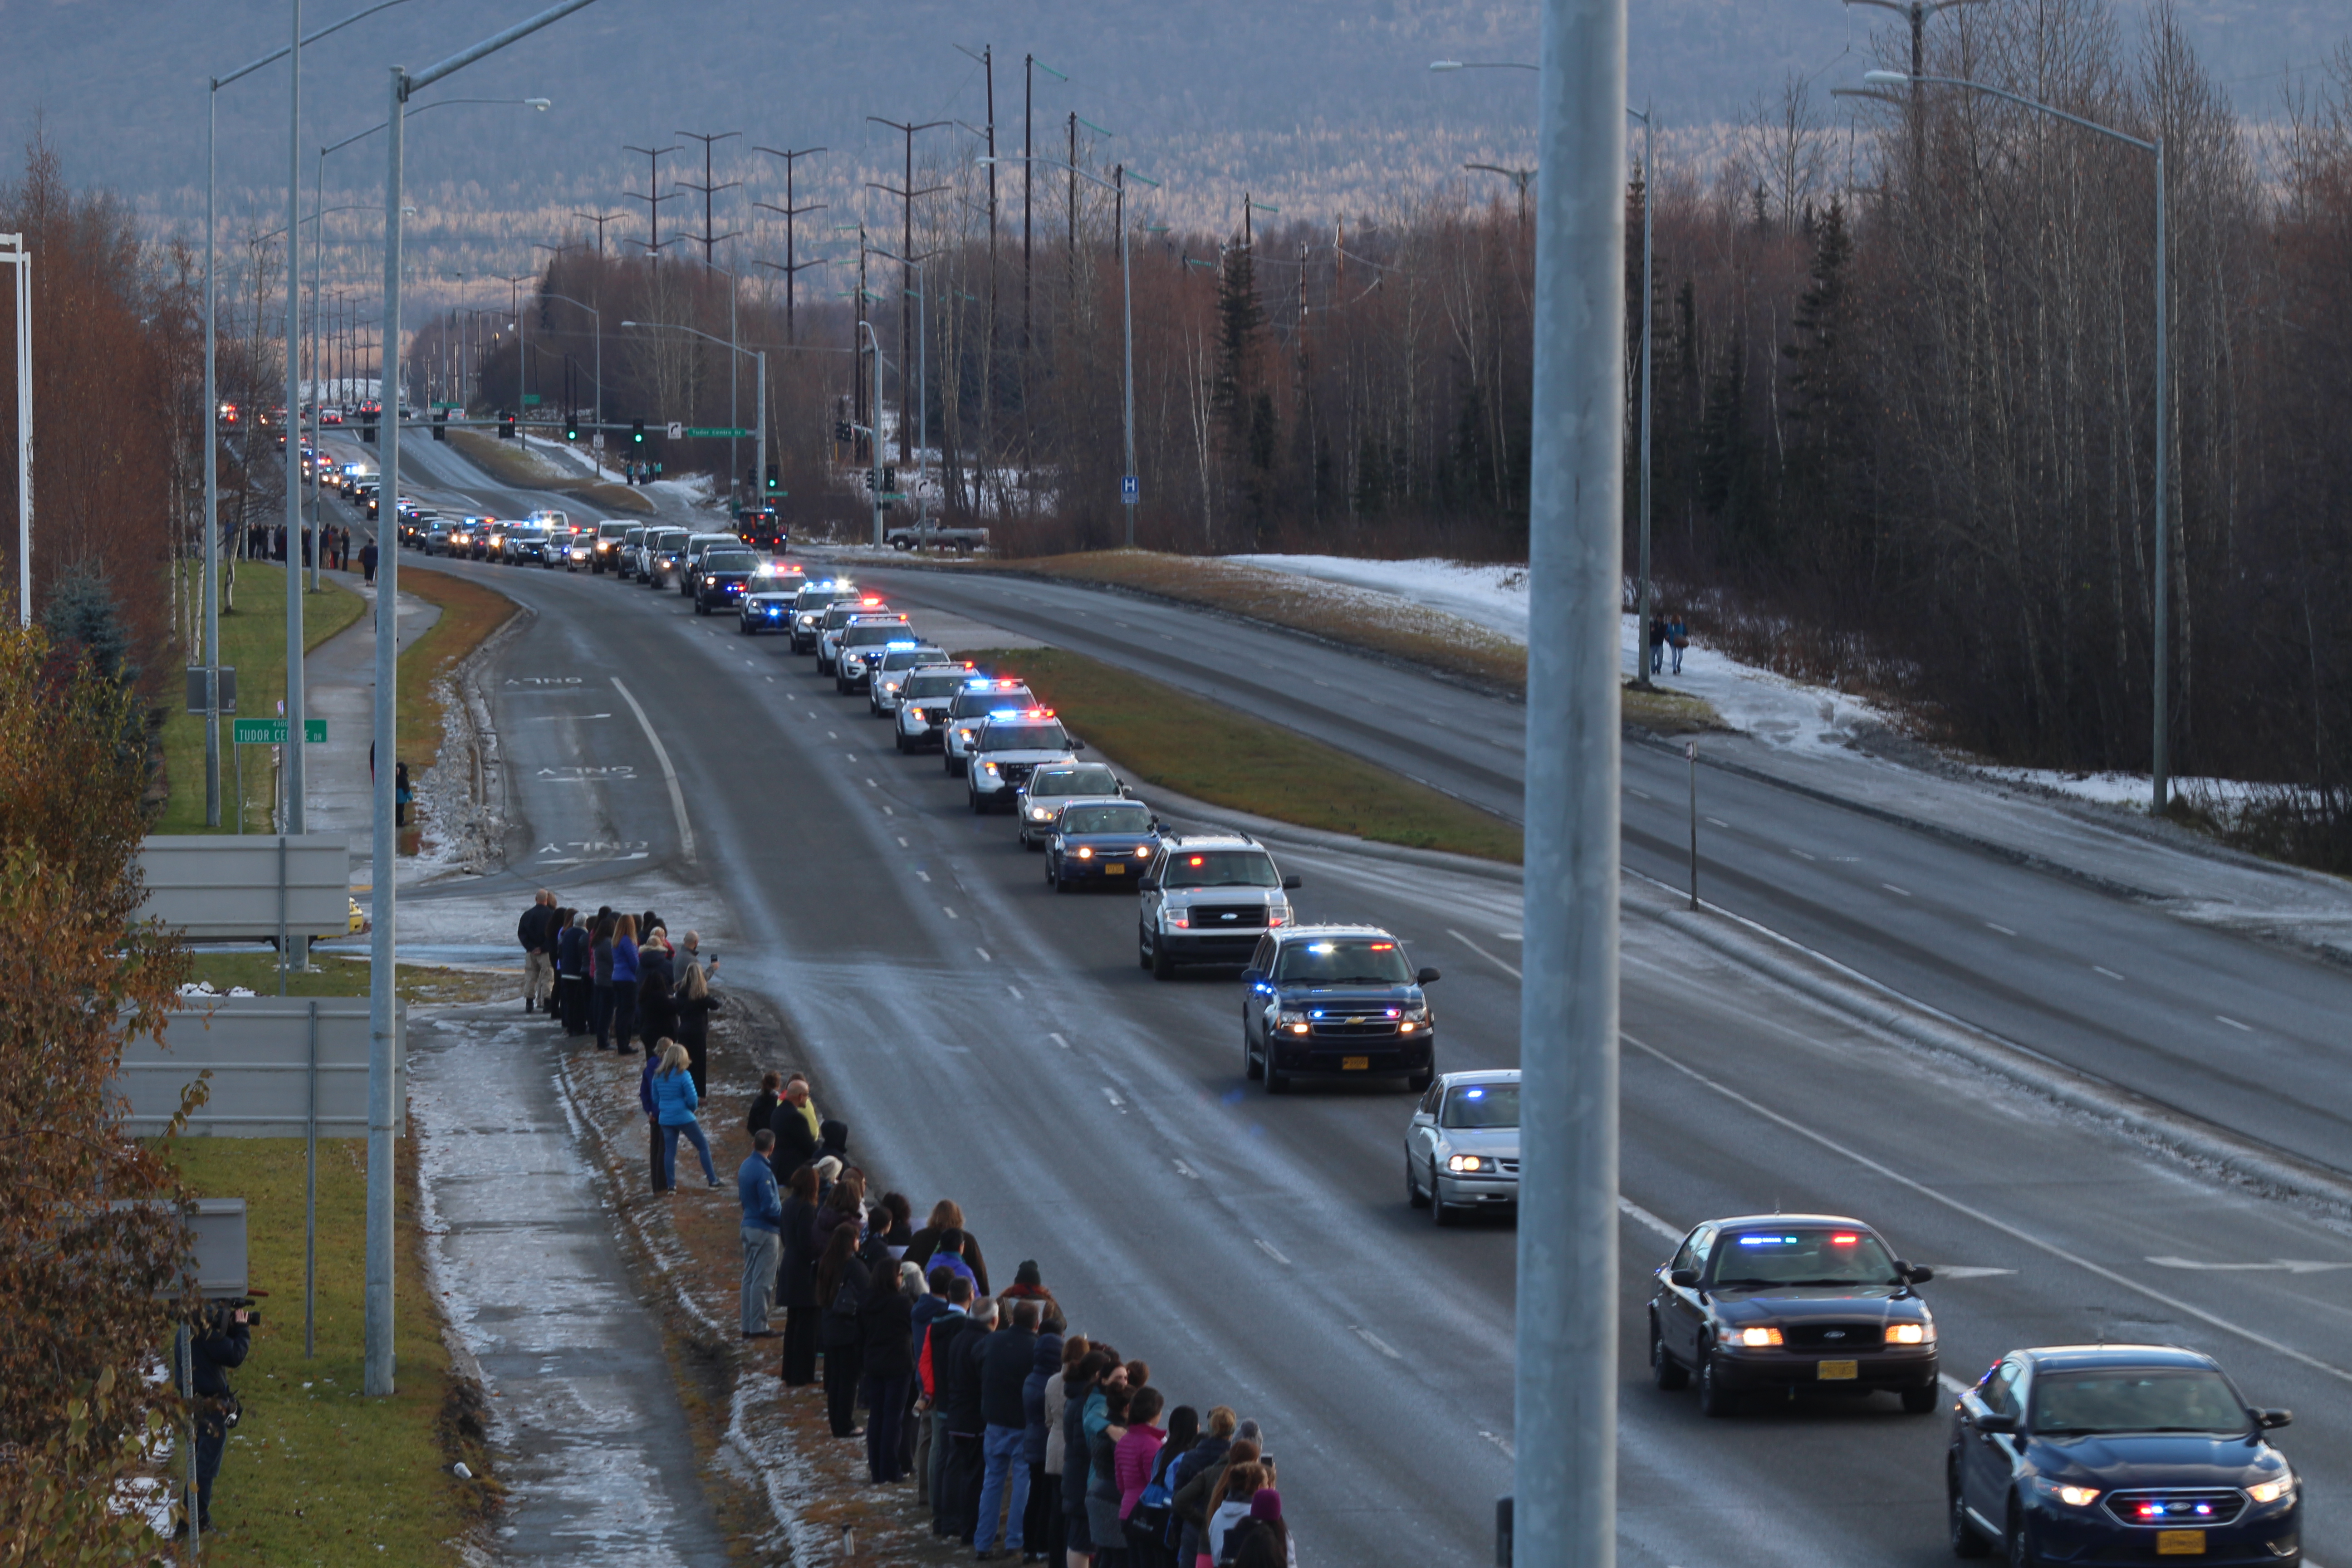 Anchorage citizens watch as a police escort brings Sgt. Allen Brandt's body to Ted Stevns International Airport (Photo by Wesley Early, Alaska Public Media - Anchorage)